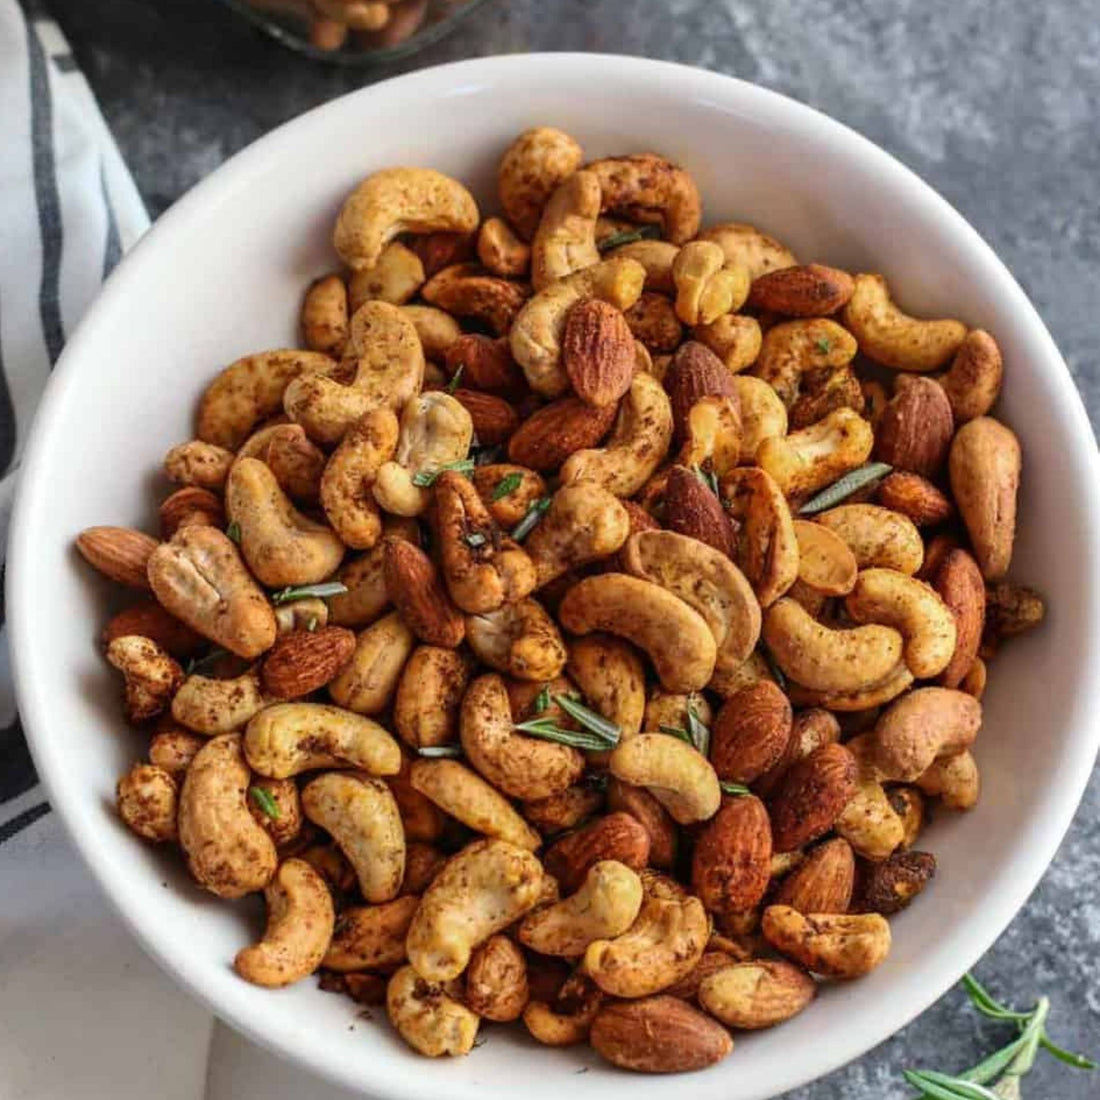 Chili and Rosemary Roasted Nuts